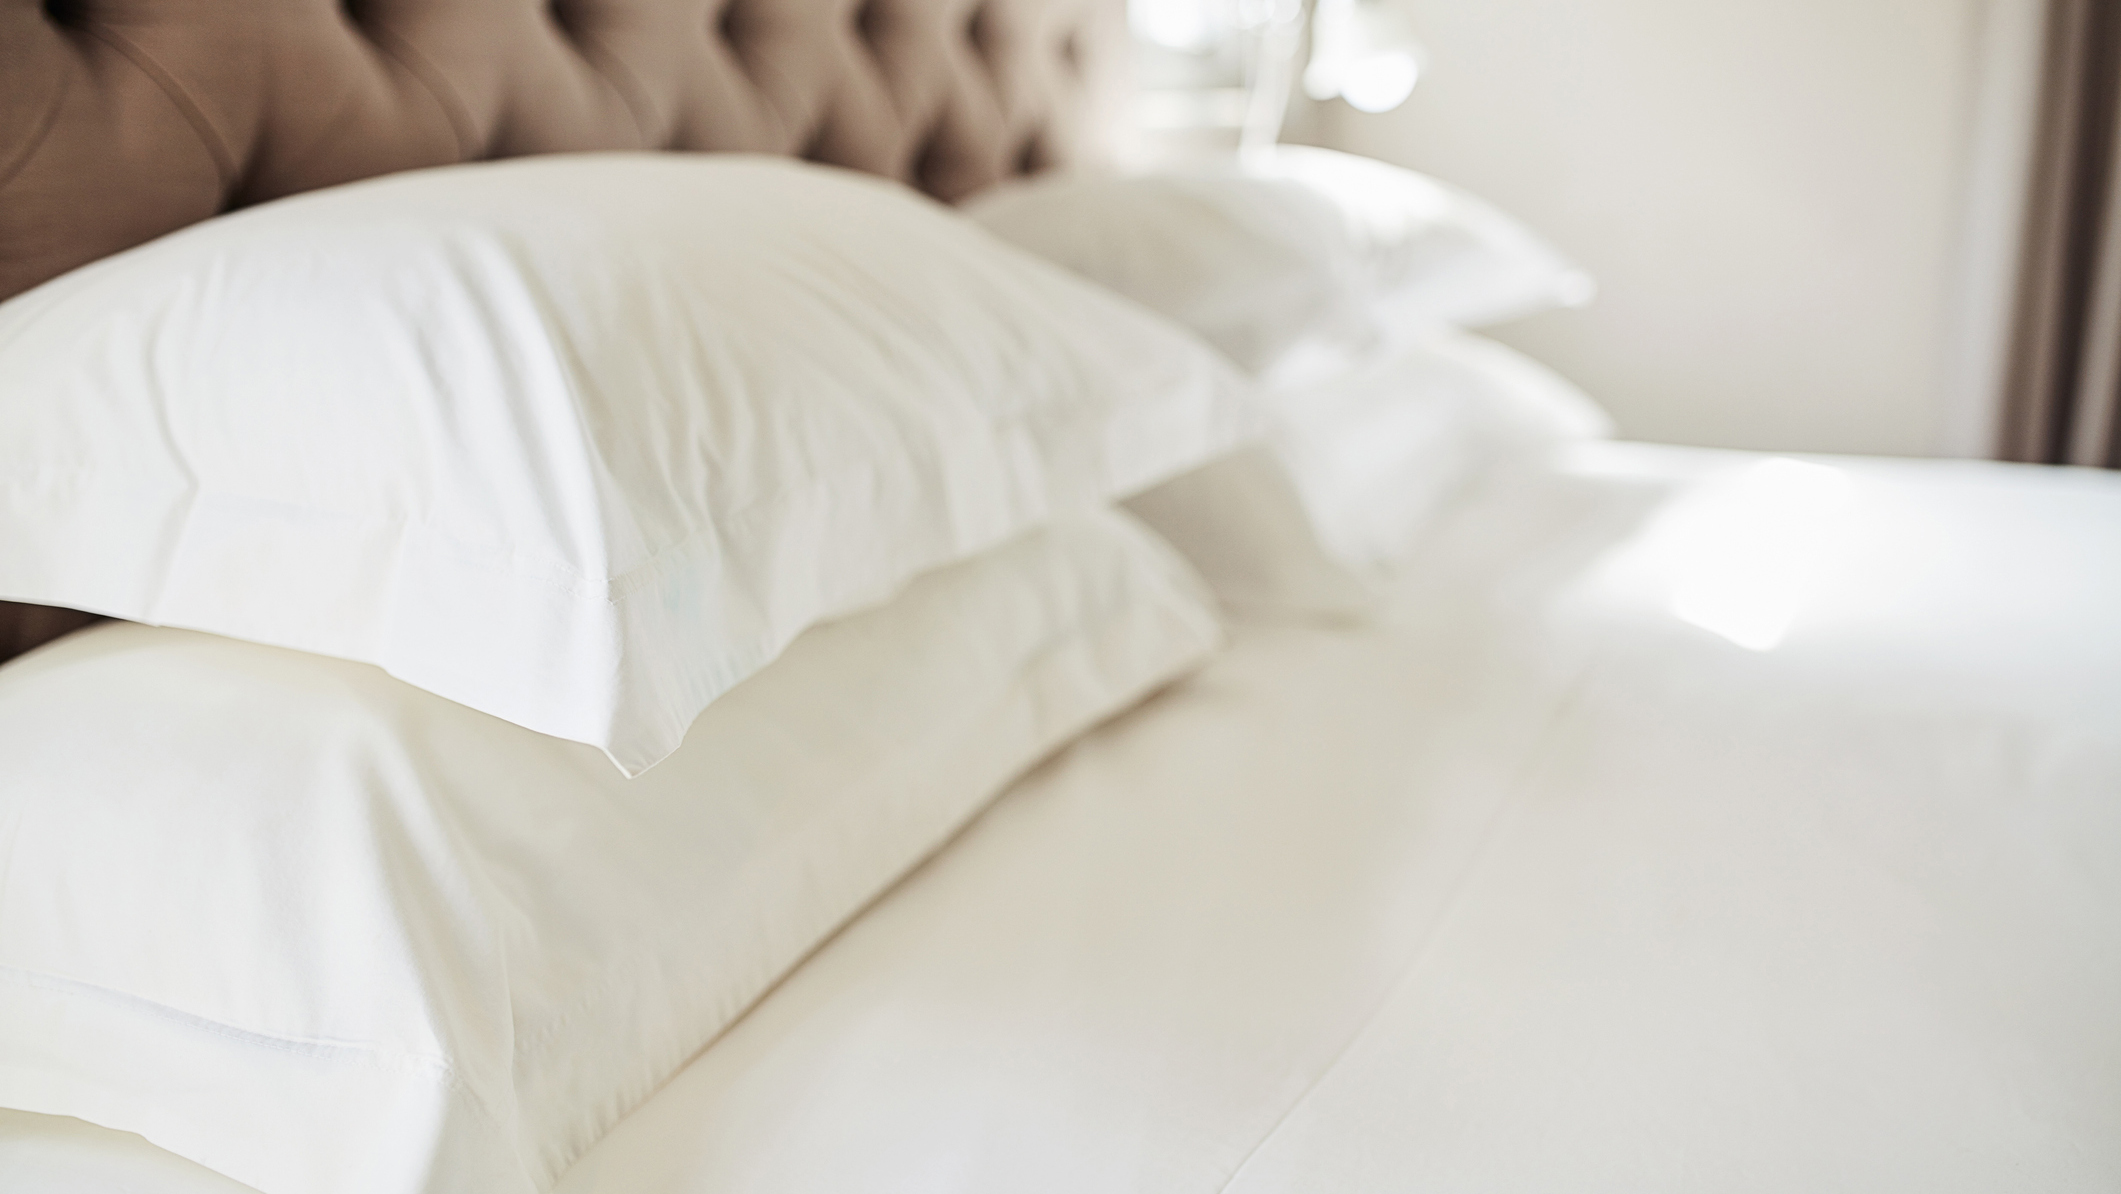 Image shows four white pillows placed on a white mattress